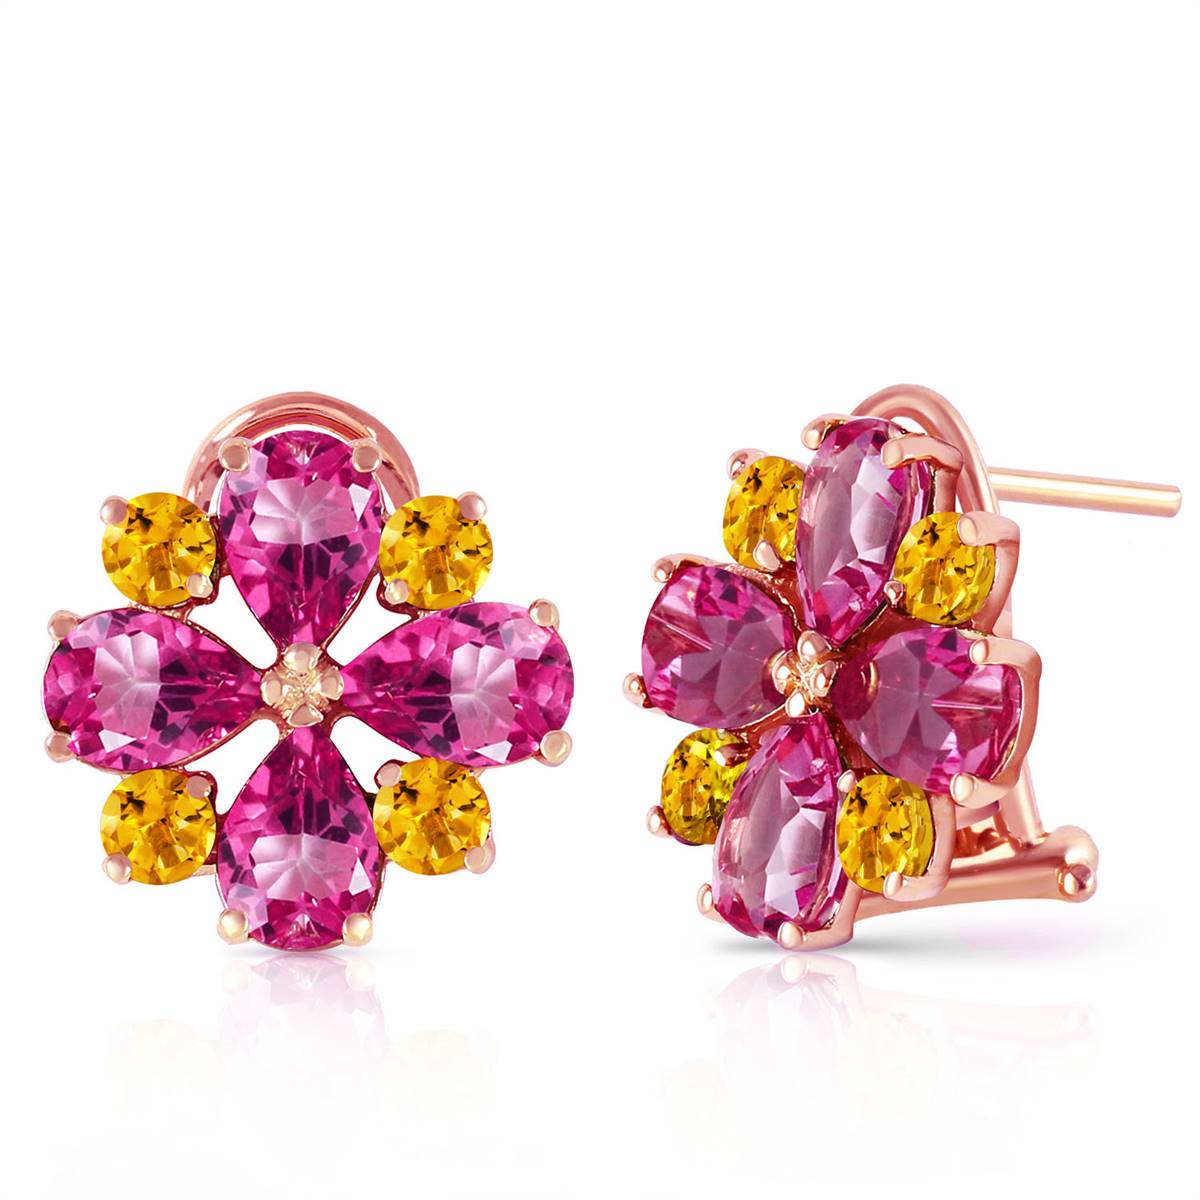 4.85 Carat 14K Solid Rose Gold French Clips Earrings Pink Topaz Citrine